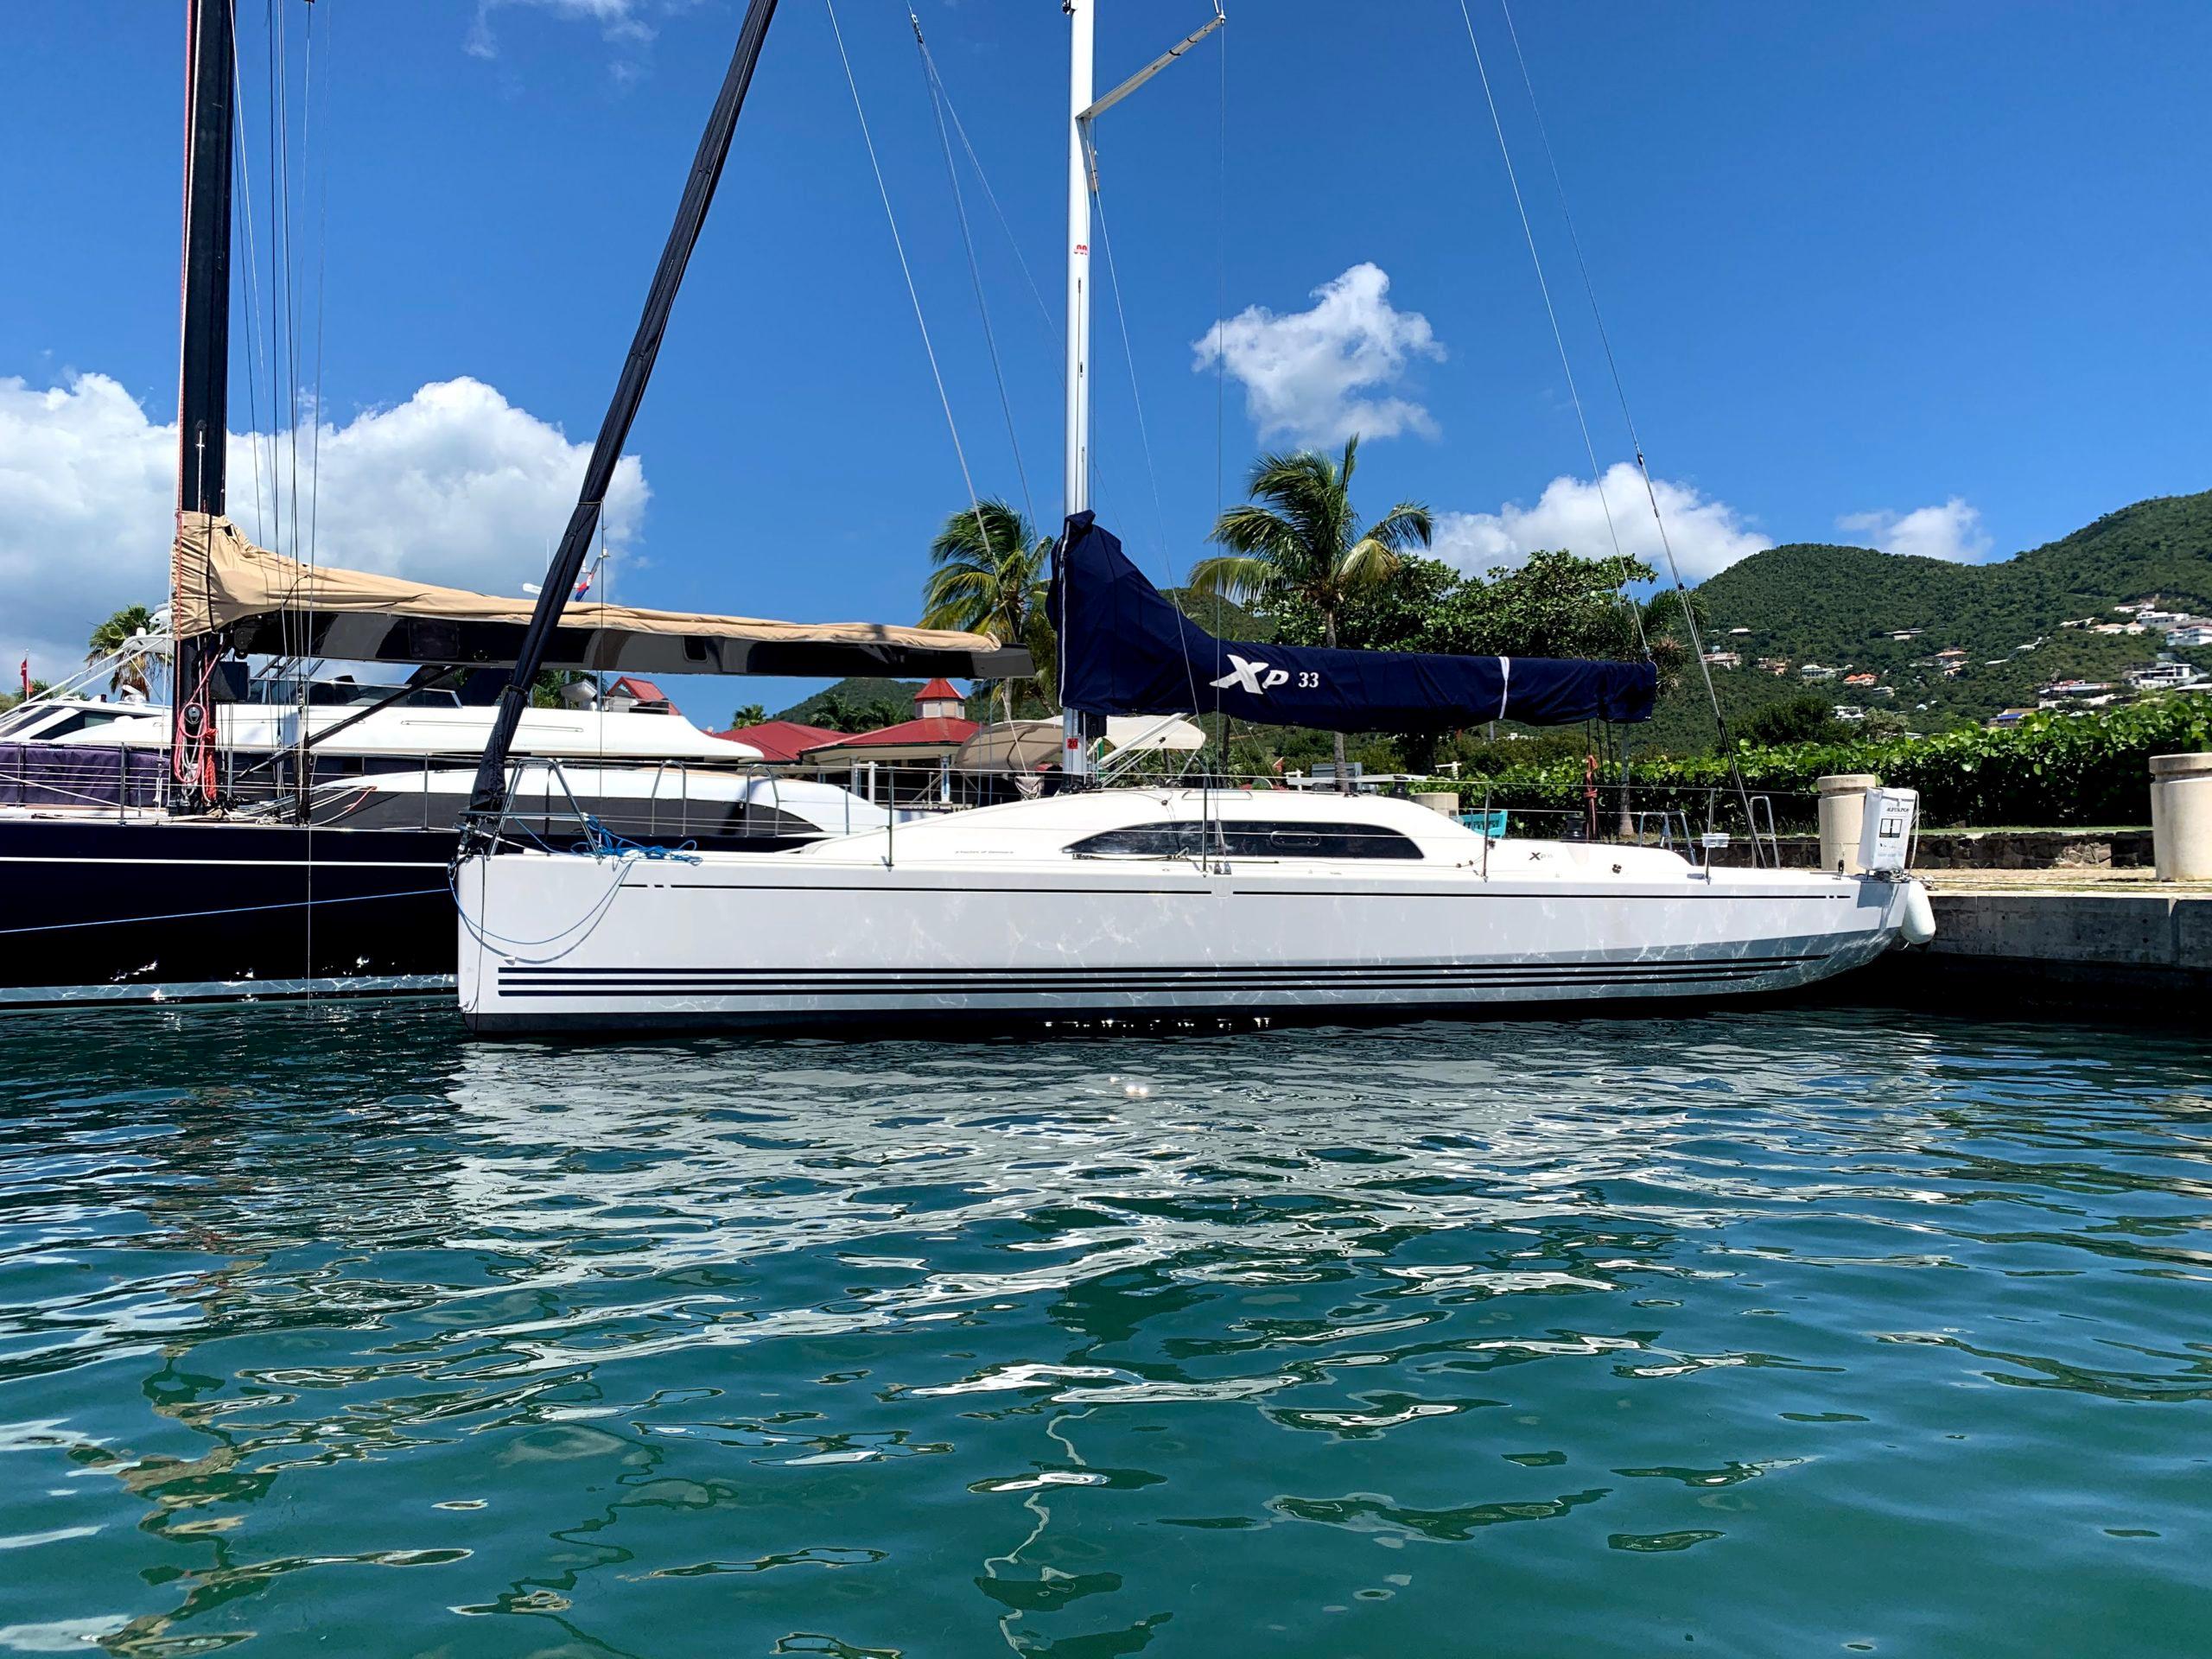 xp 33 yacht for sale